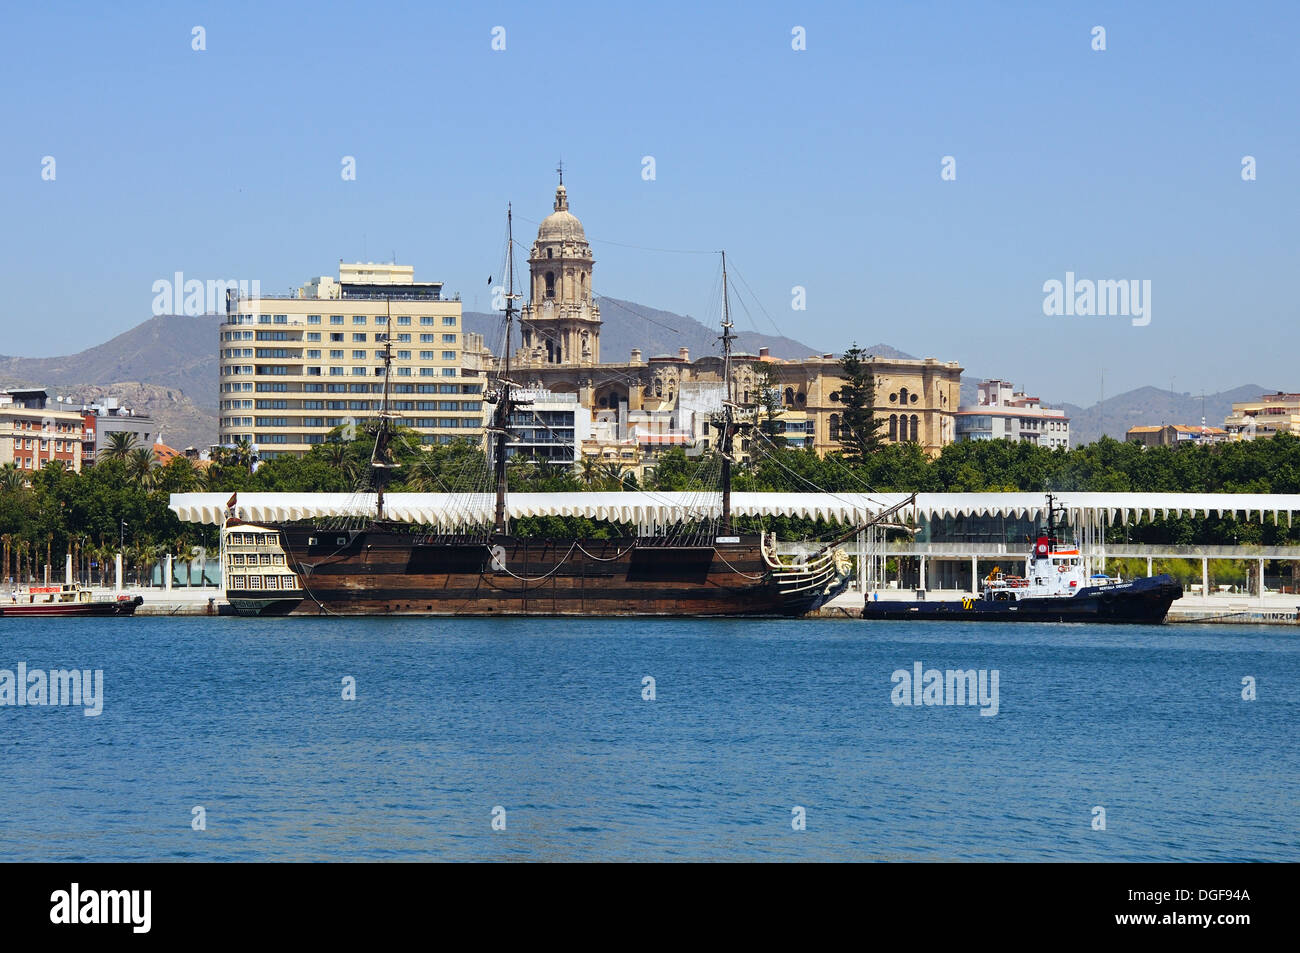 Replica of the Santisima Trinidad in the Inner harbour with the Cathedral (Catedral la Manquita) to the rear, Malaga, Spain. Stock Photo